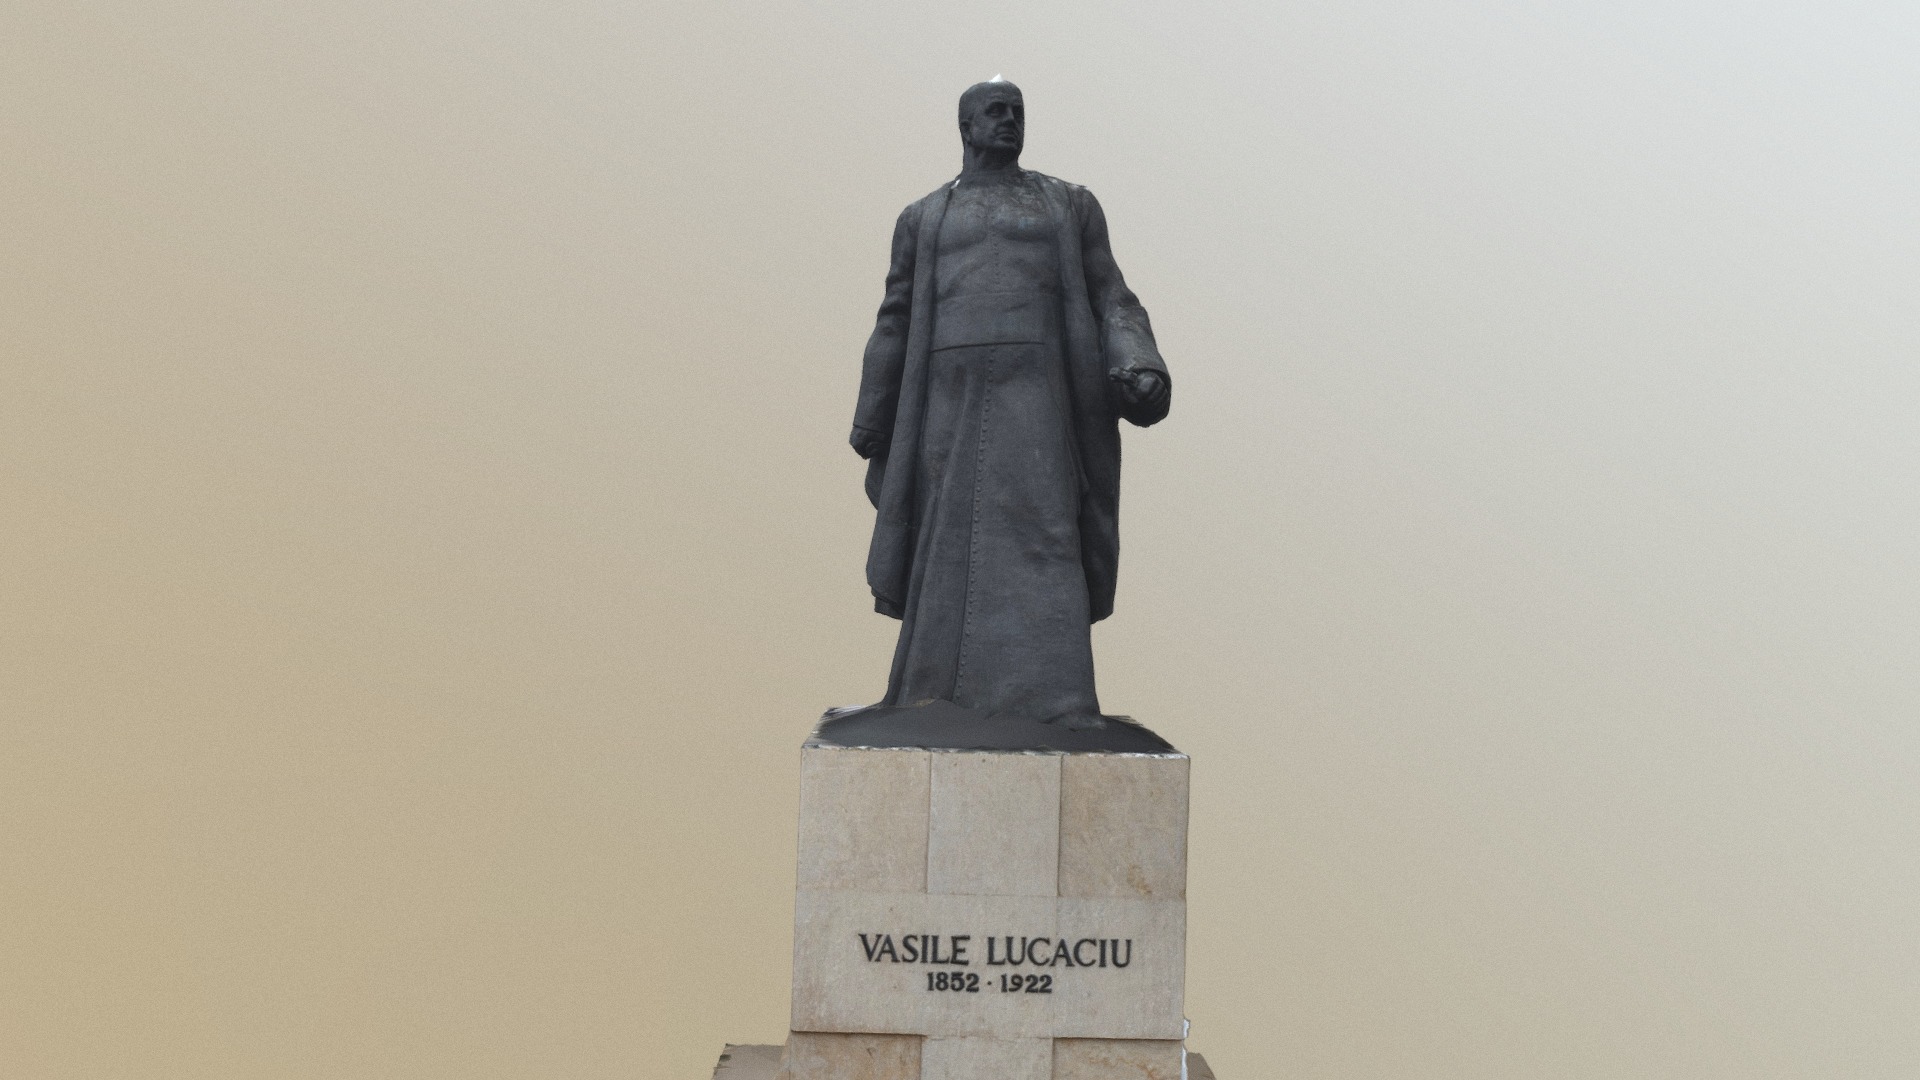 3D model Dr. Vasile Lucaciu – Bronz 1936 - This is a 3D model of the Dr. Vasile Lucaciu - Bronz 1936. The 3D model is about a statue of a person.